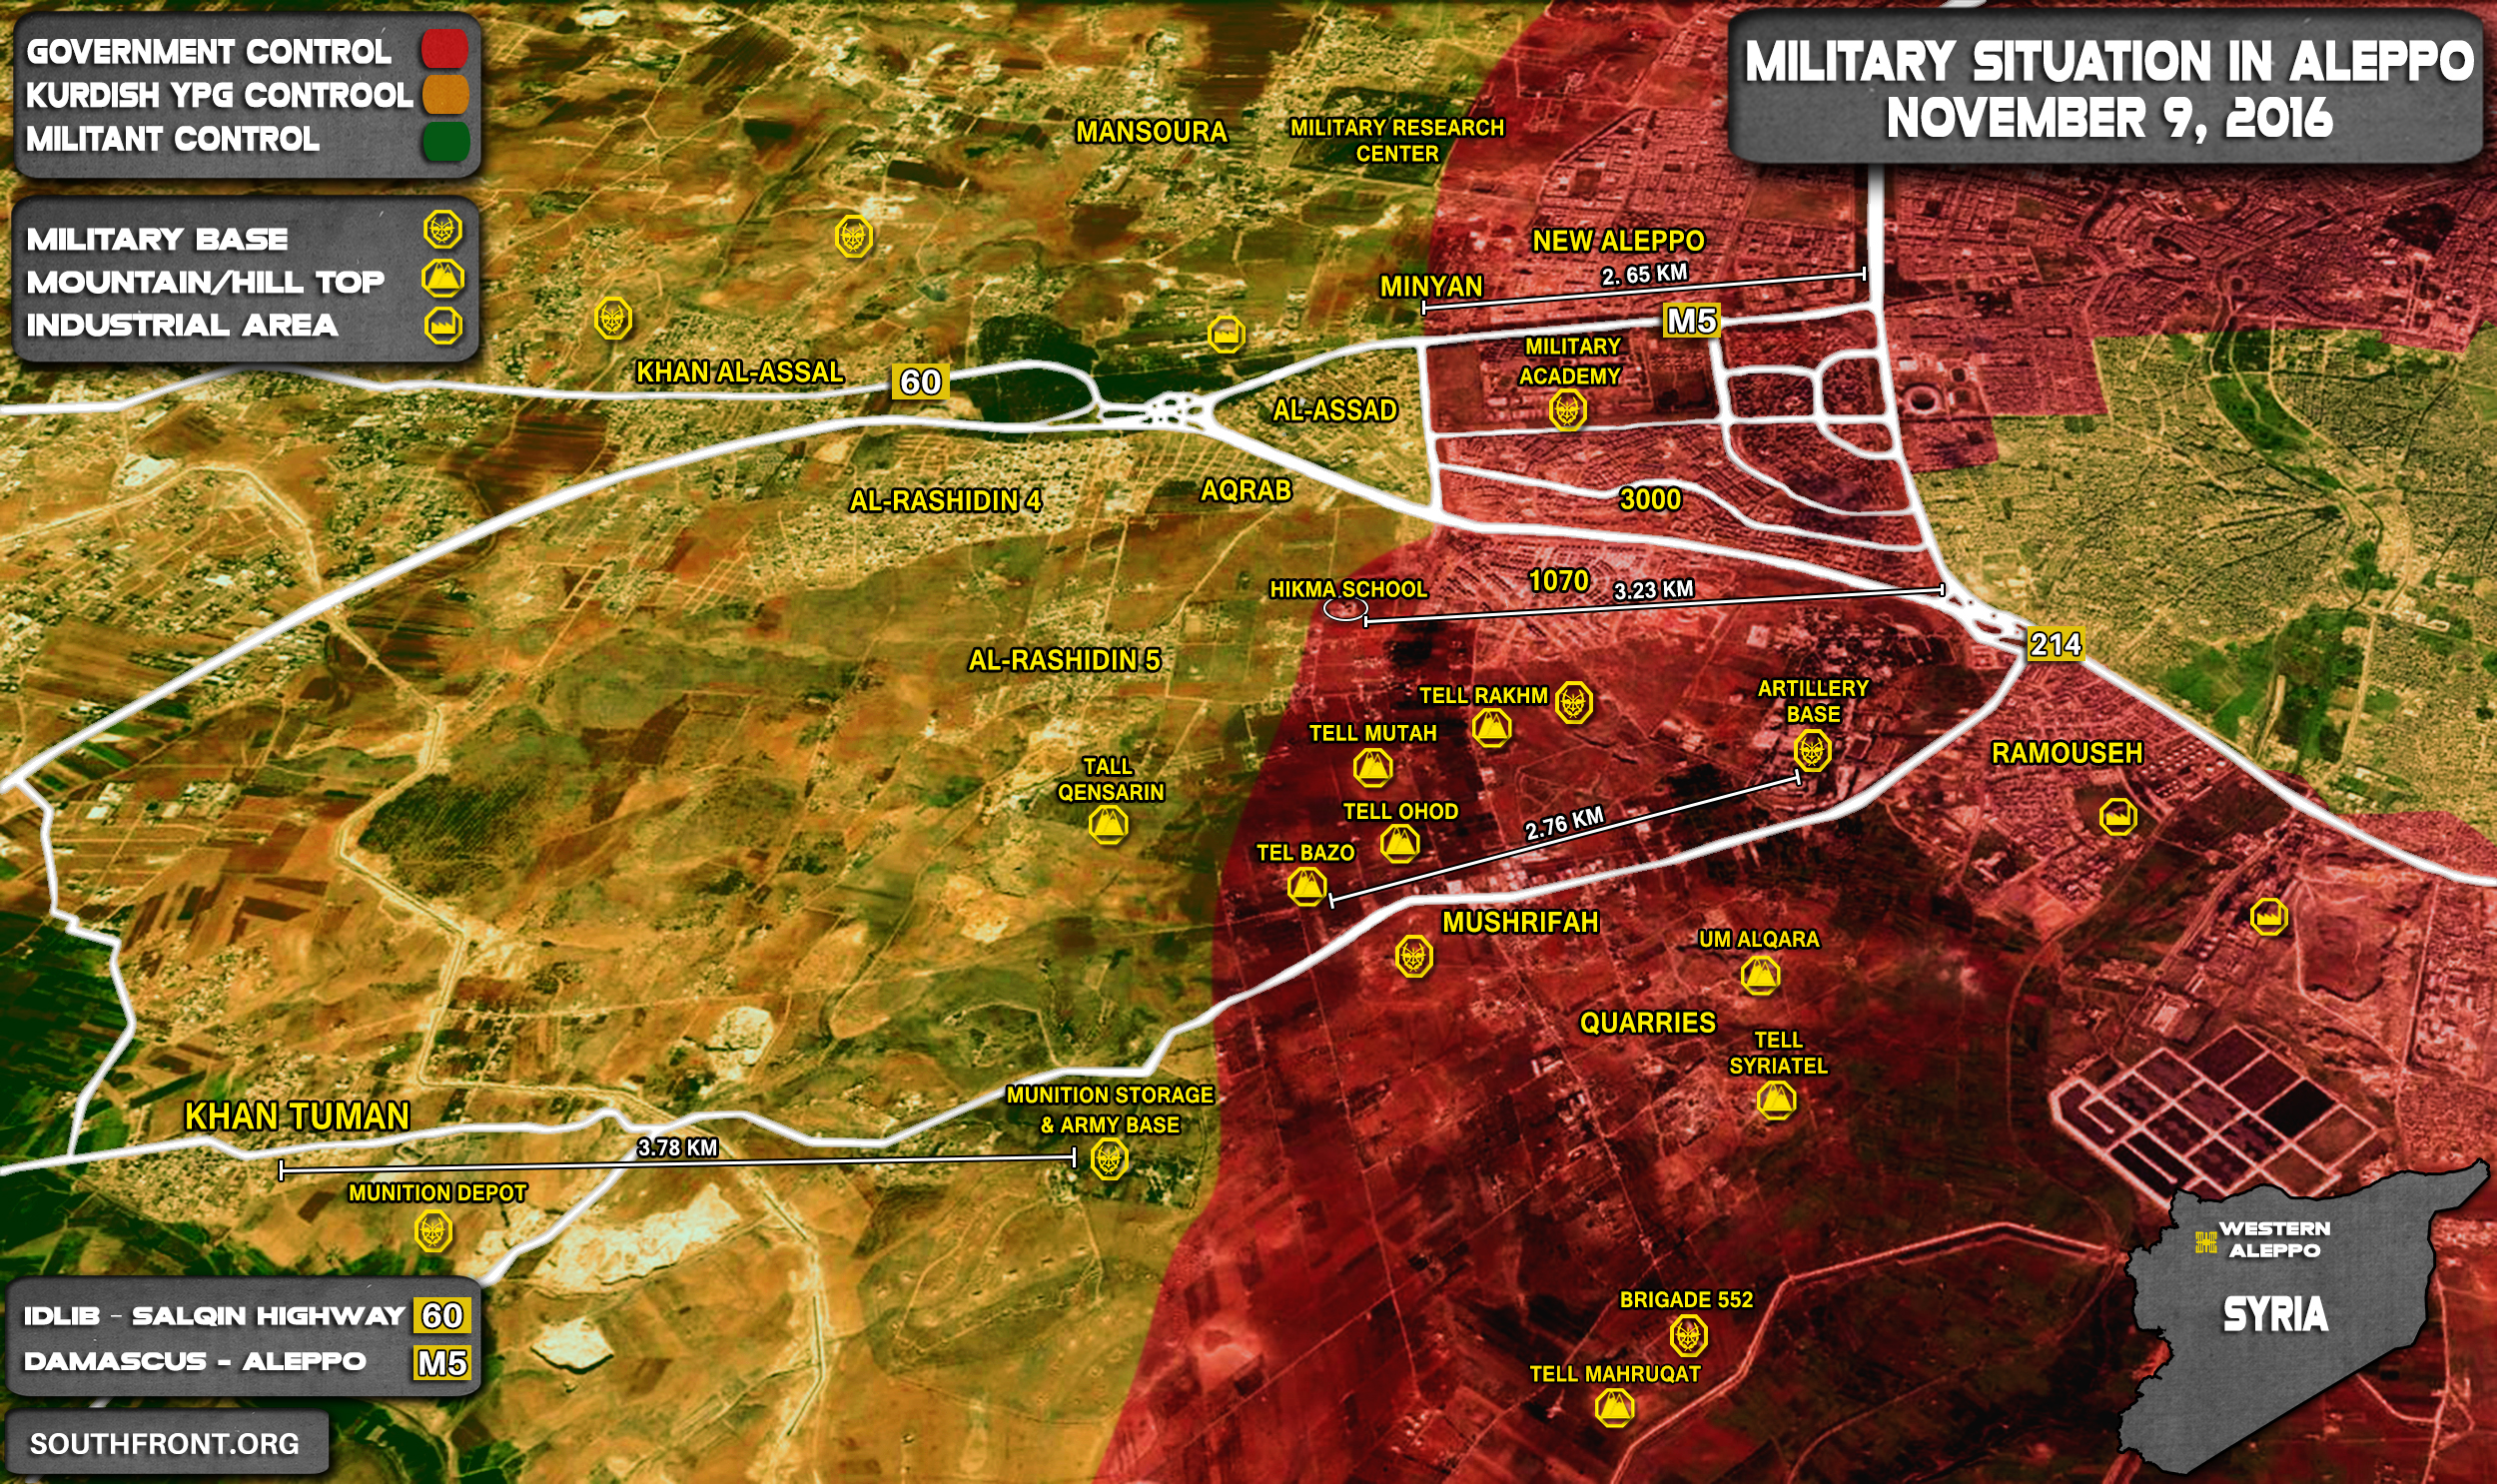 Overview of Military Situation in Aleppo City on November 9, 2016